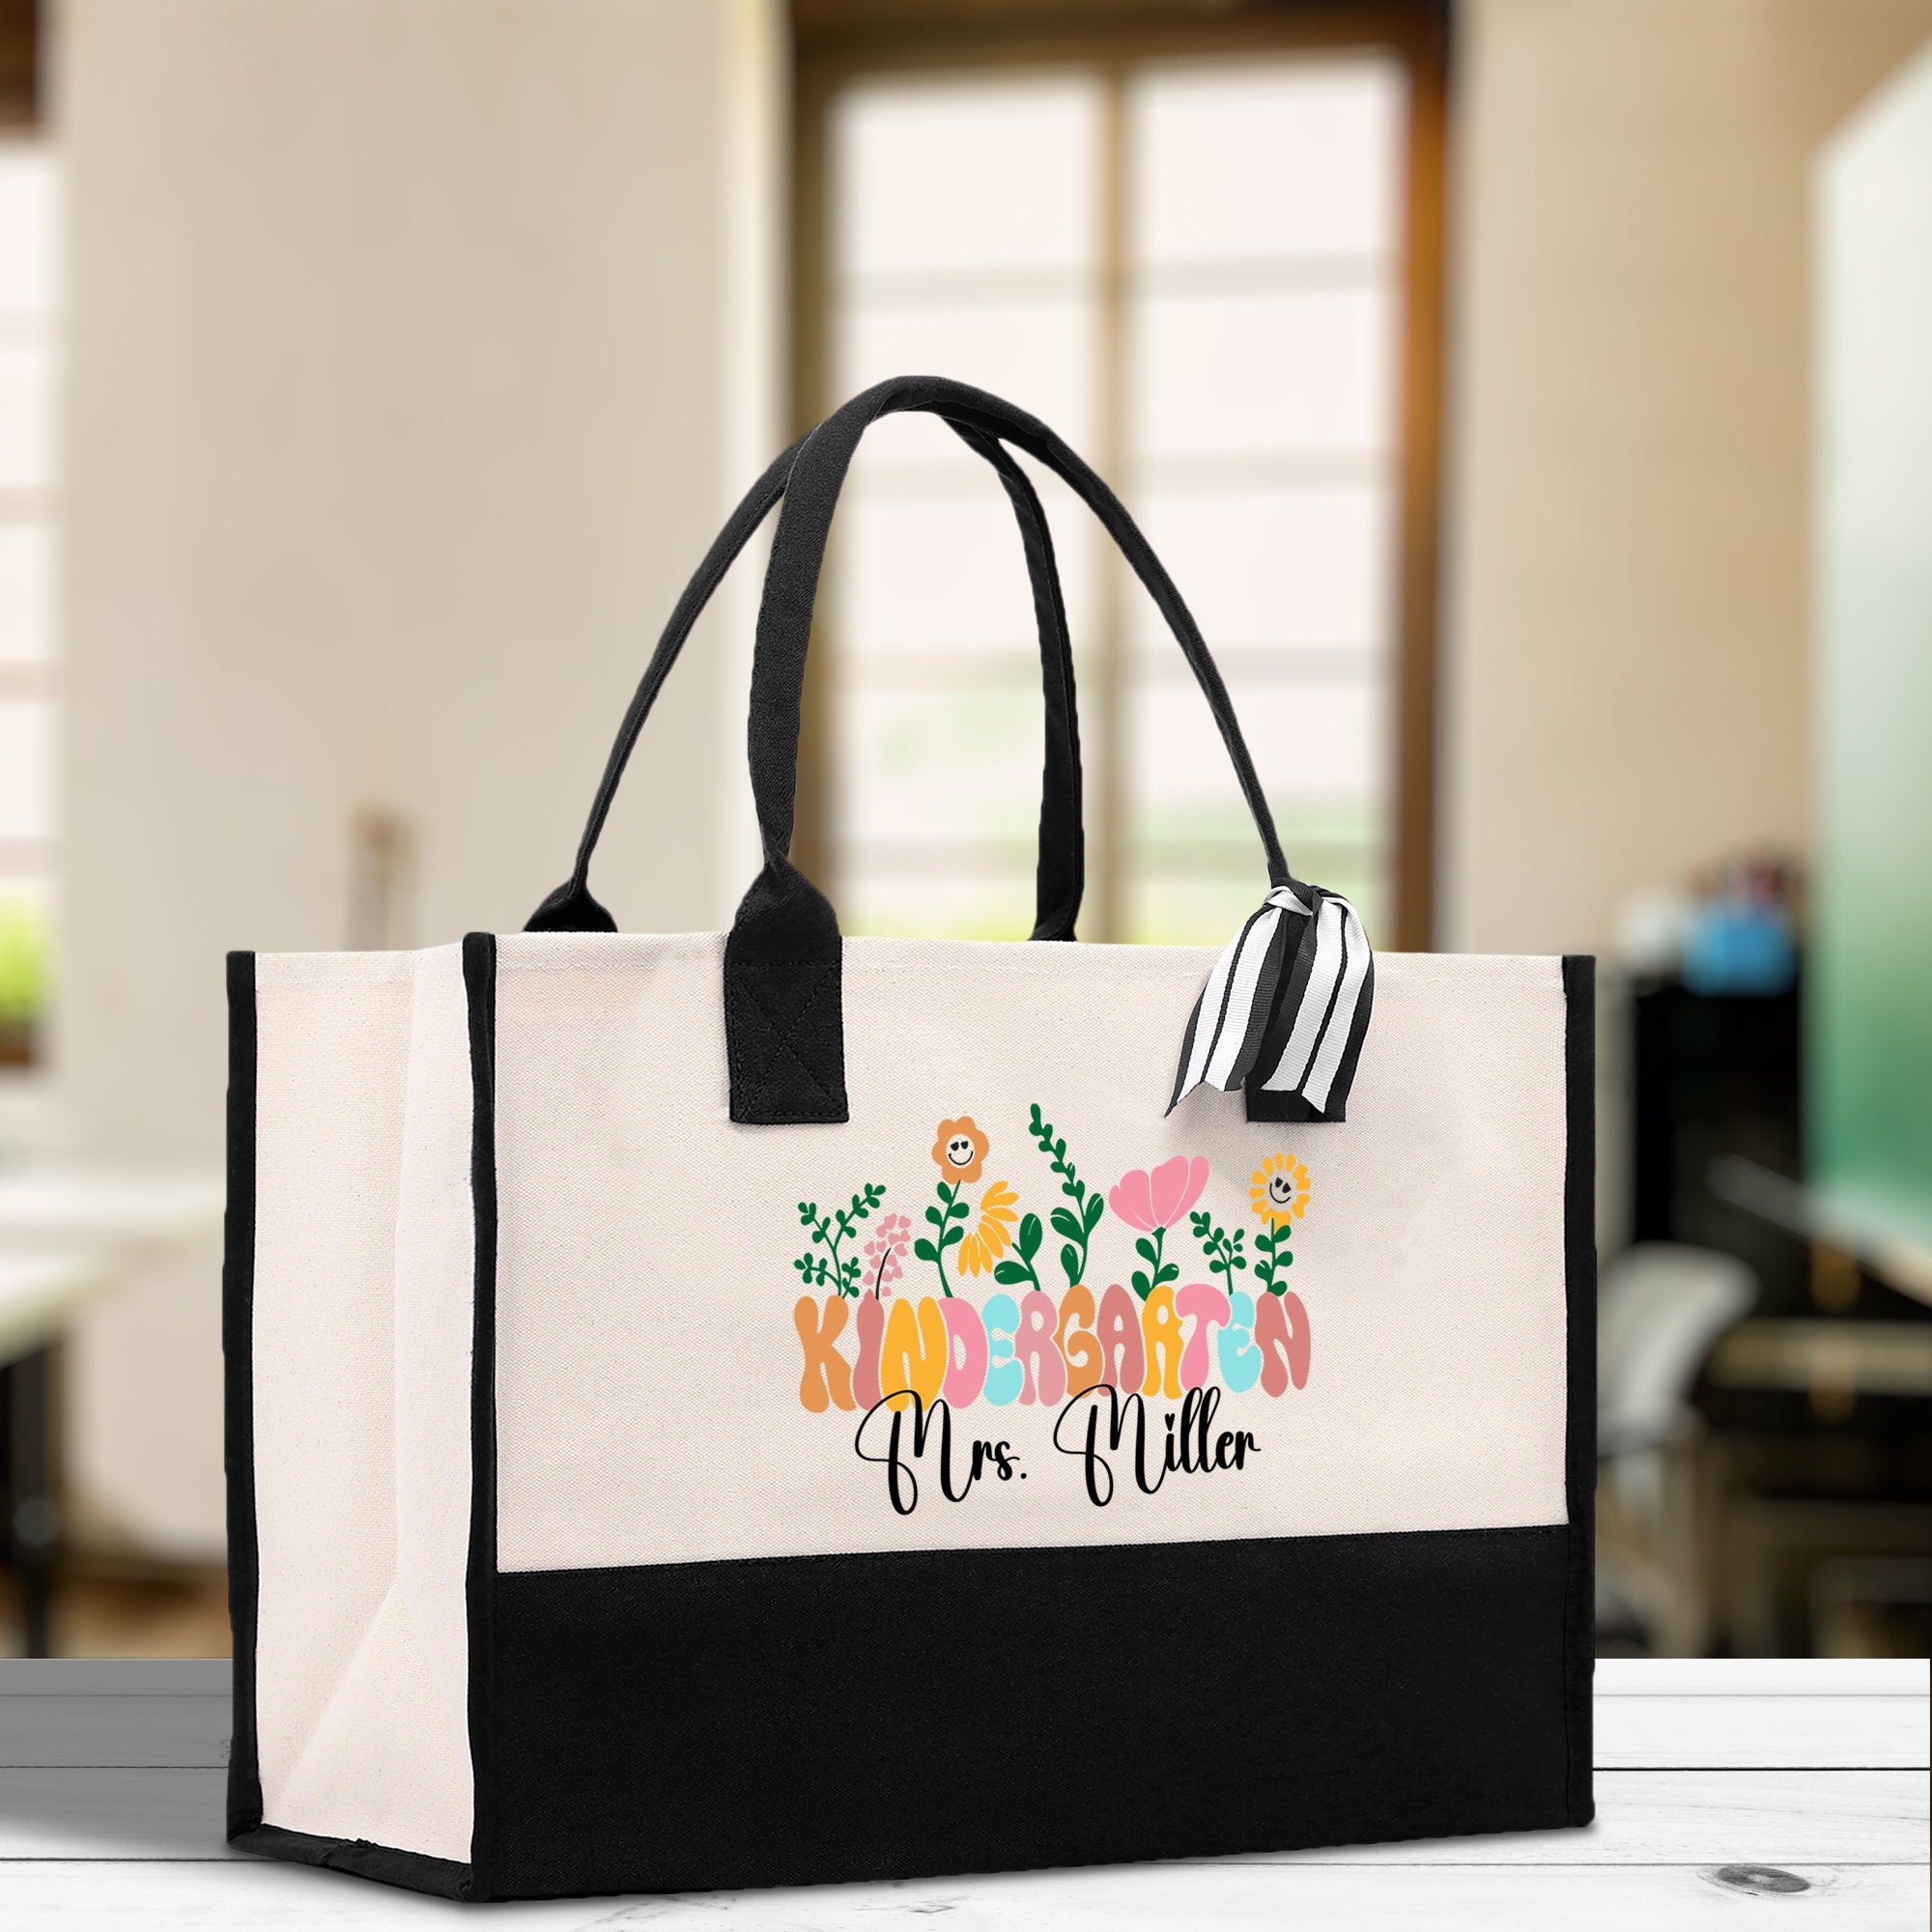 a black and white bag with a flower design on it